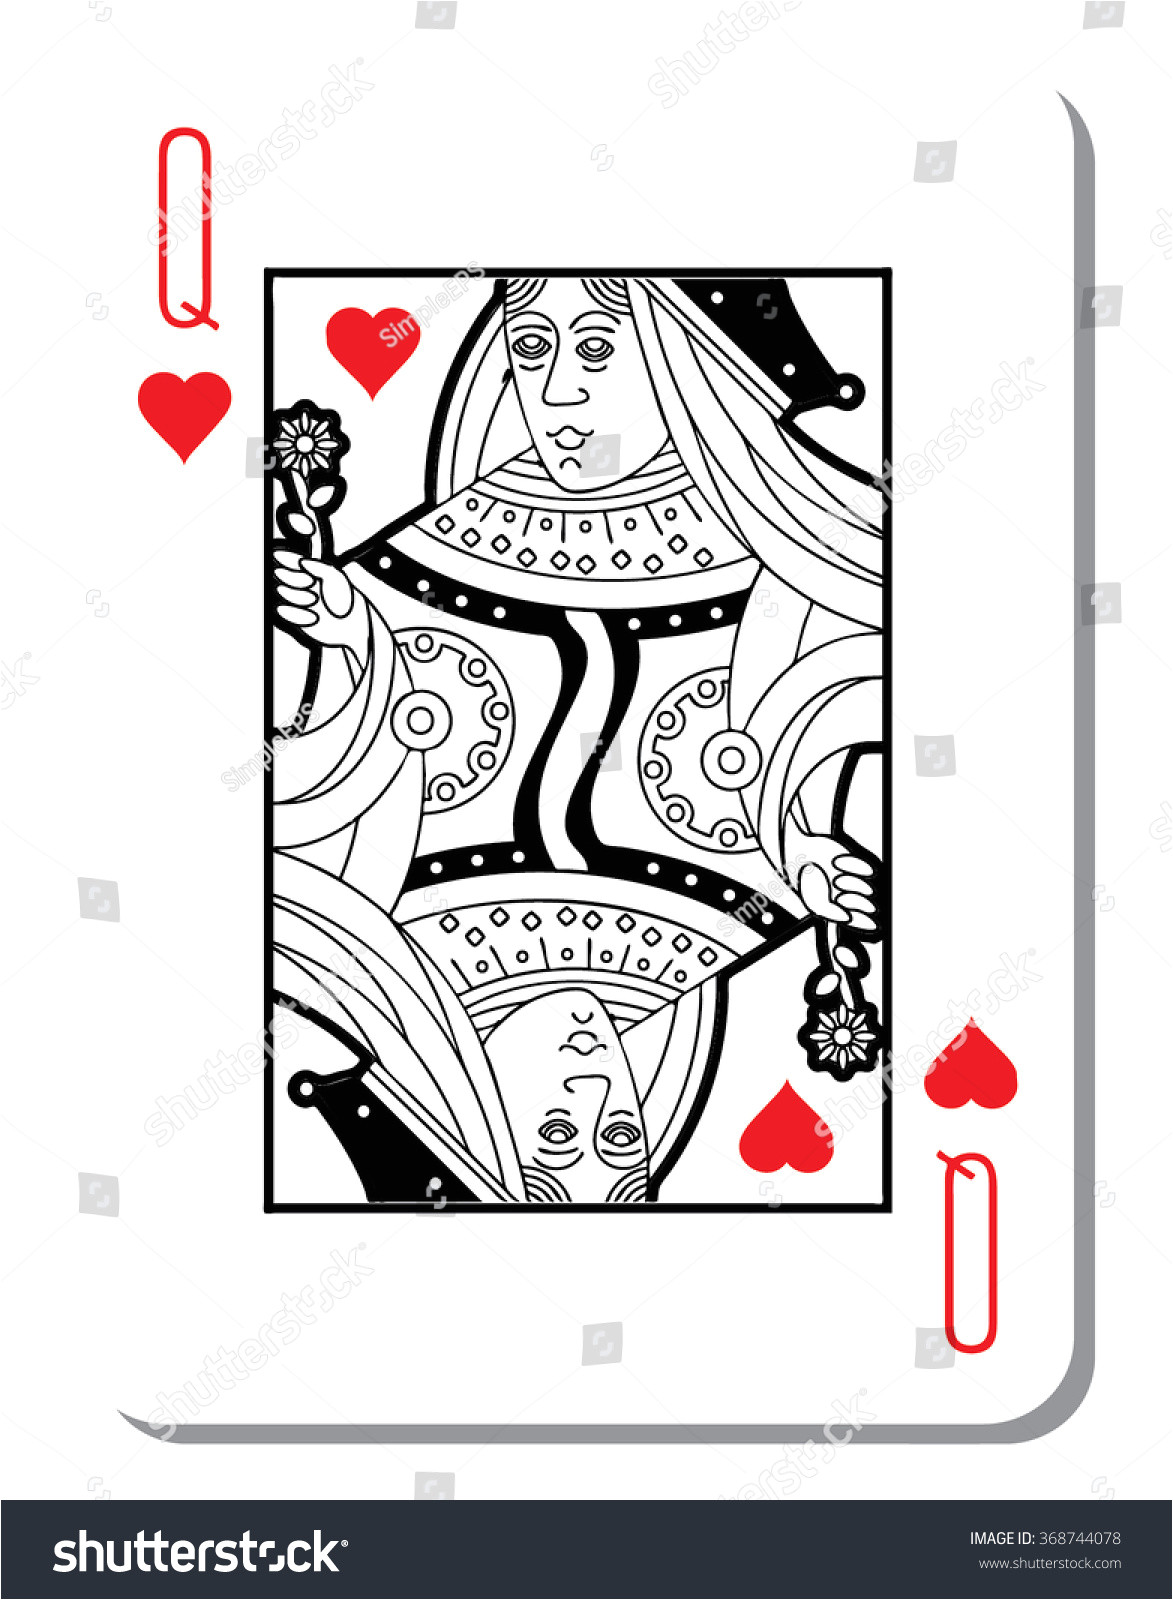 stock vector hearts queen with a blank background for poker from a deck of playing cards quality vector 368744078 jpg